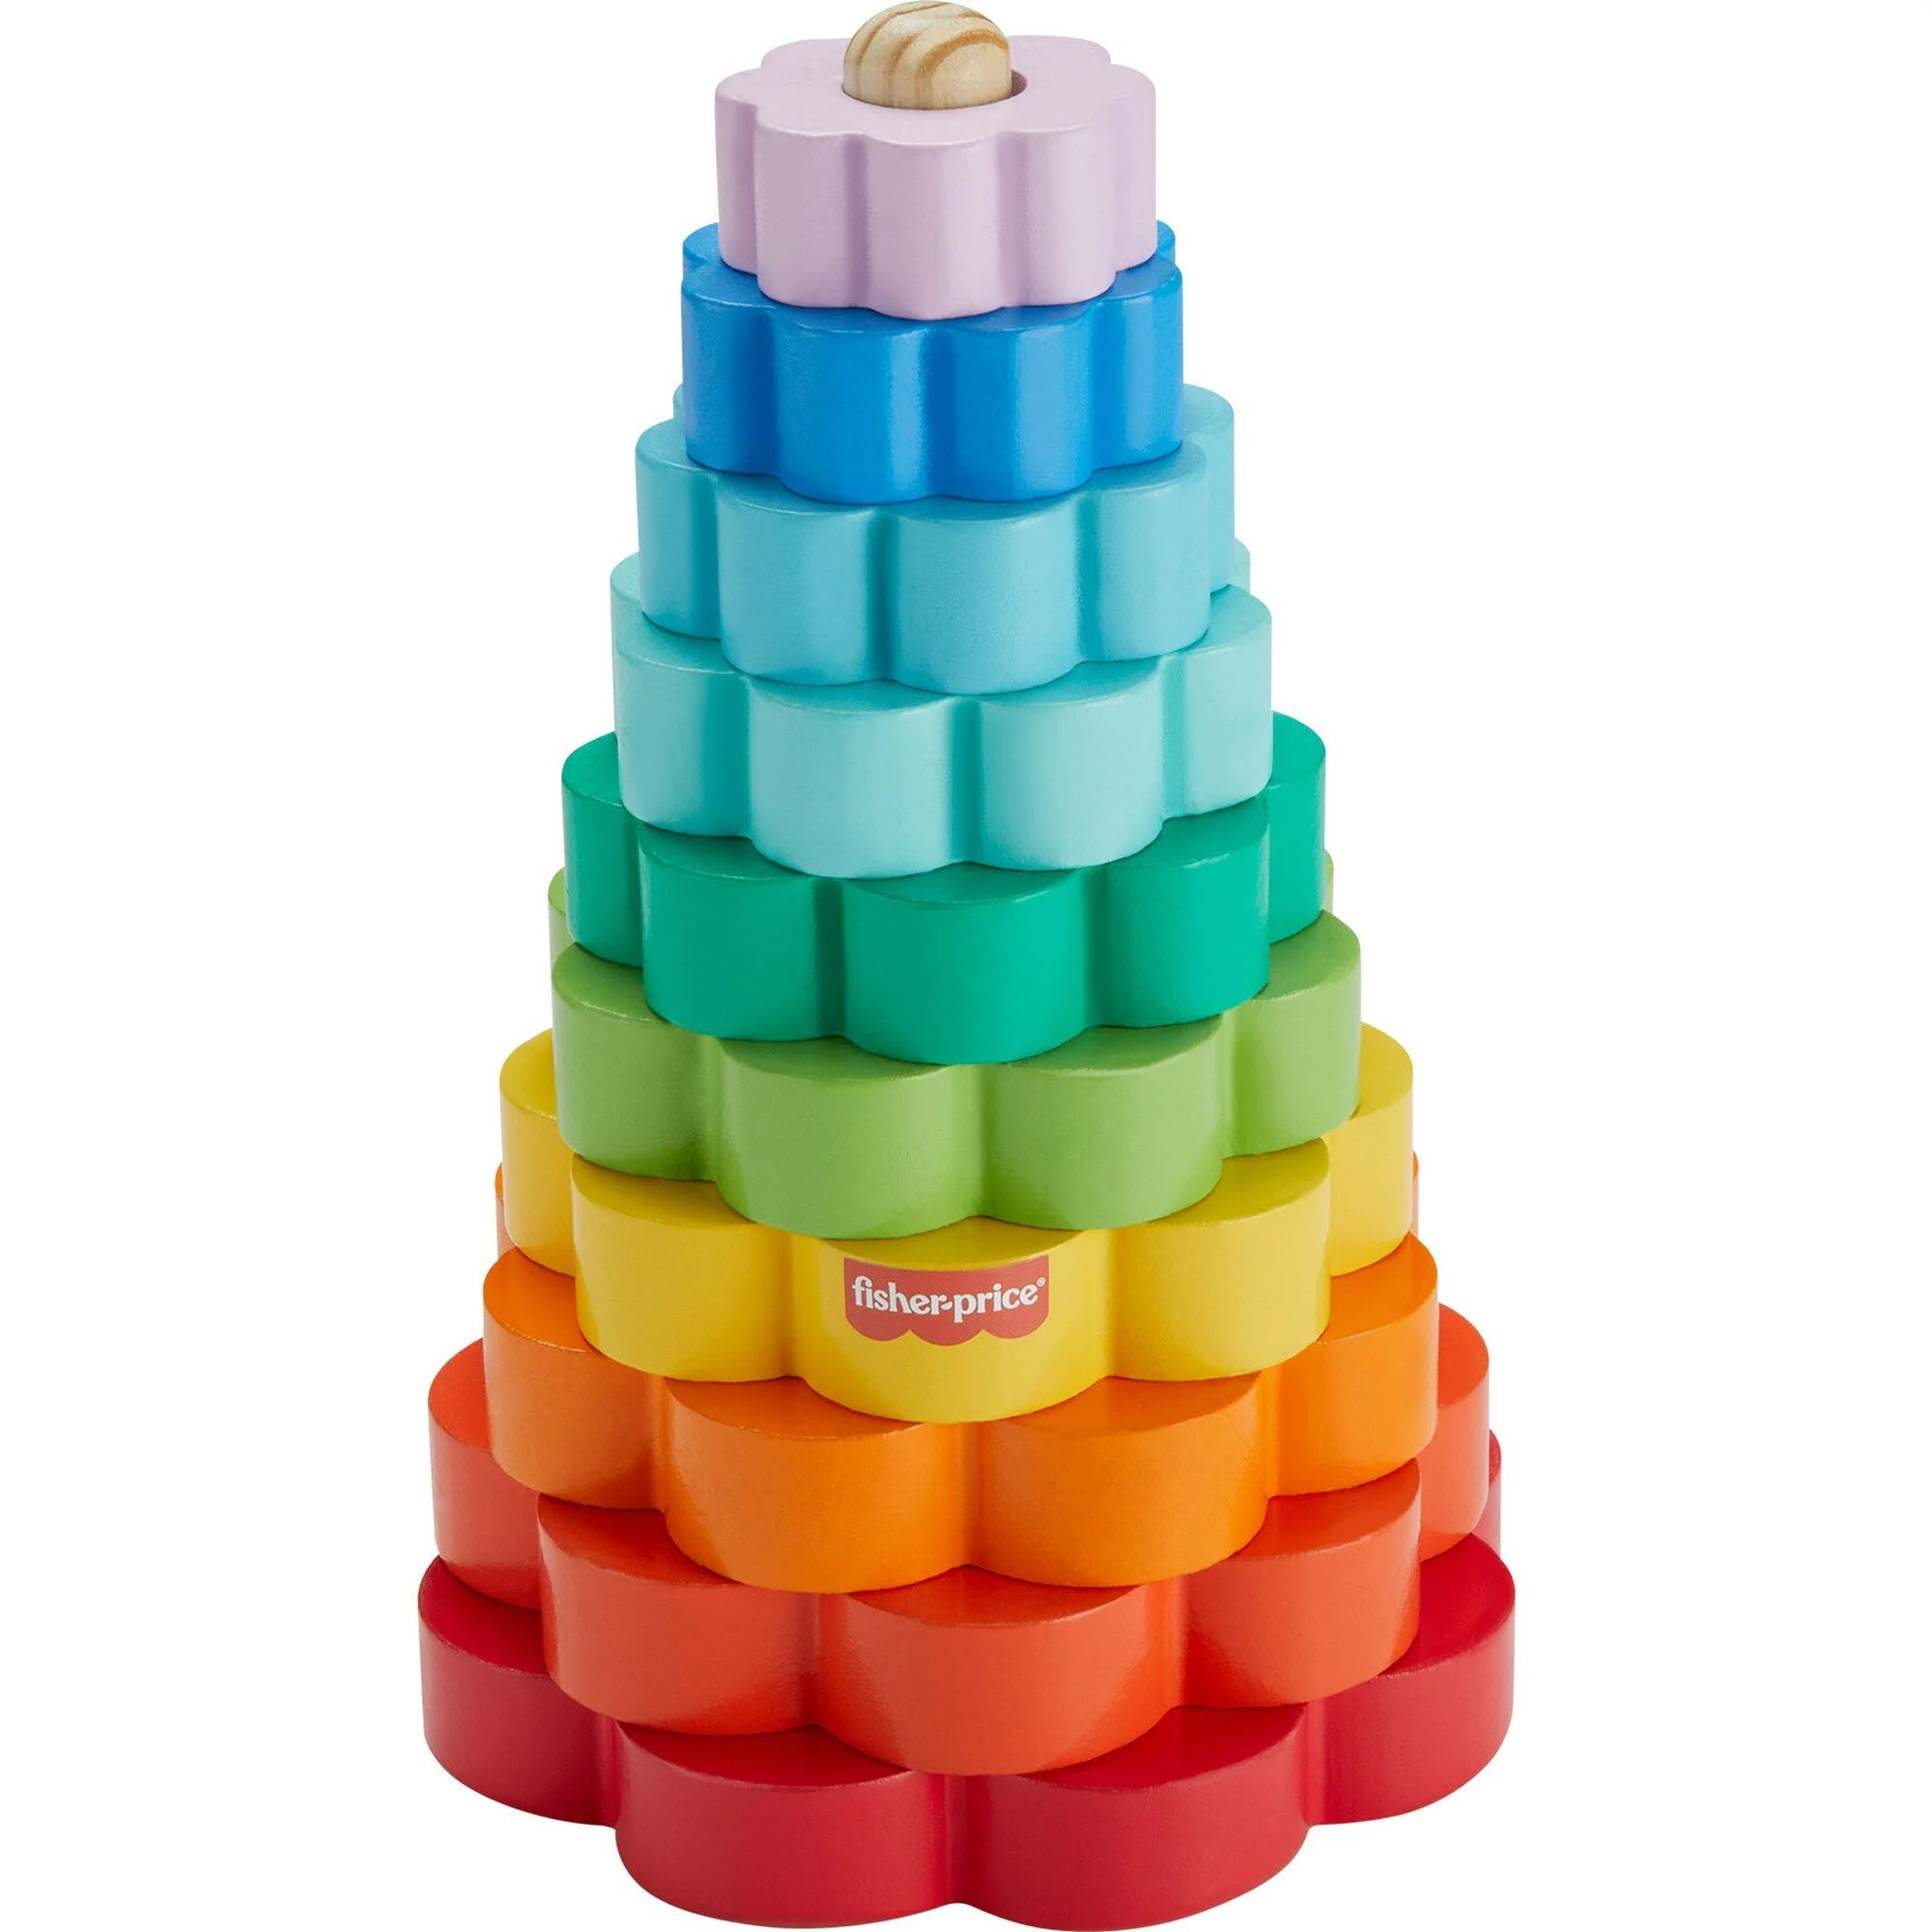 Fisher-Price Wooden Rainbow Ring Stacking Toy, Fine Motor Skills for Toddlers 18 month, 26 Wood P... | Walmart (US)